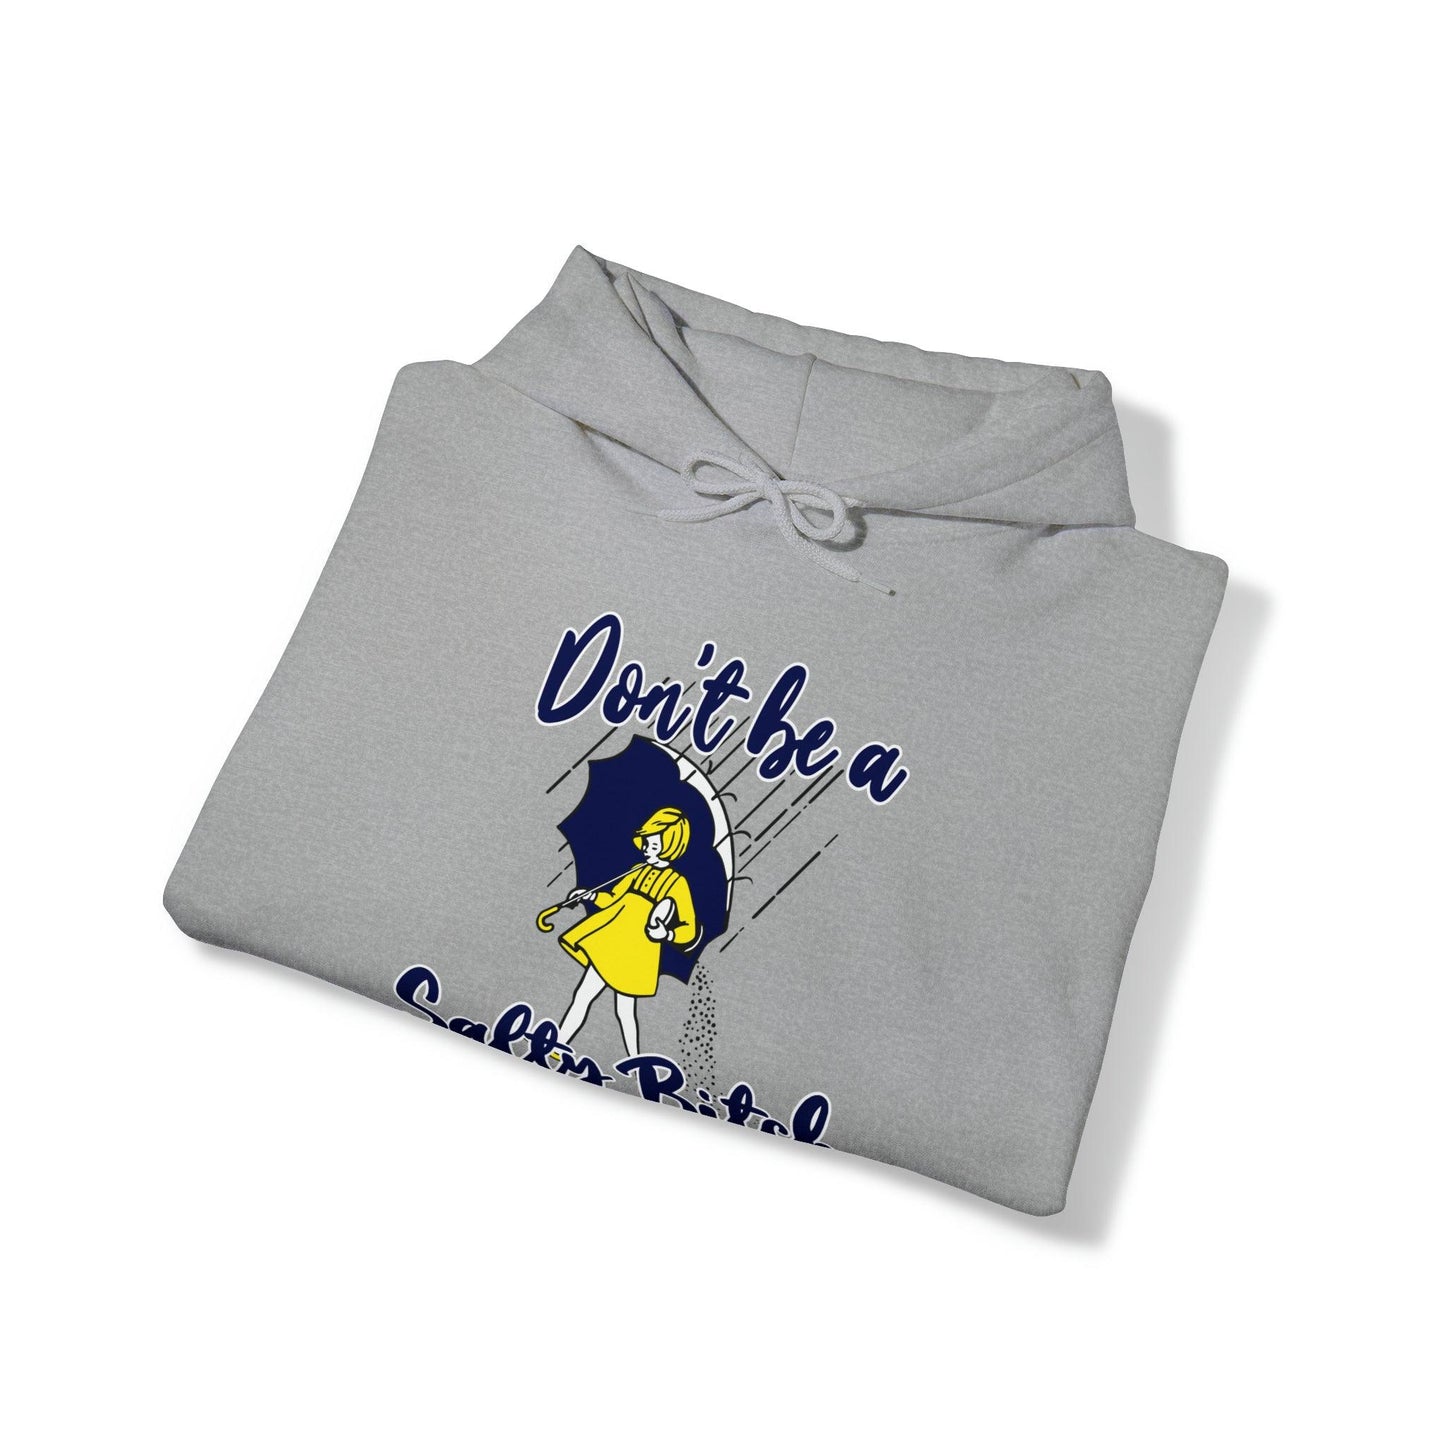 Don't Be A Salty Bitch - Hooded Sweatshirt - Wicked Naughty Apparel